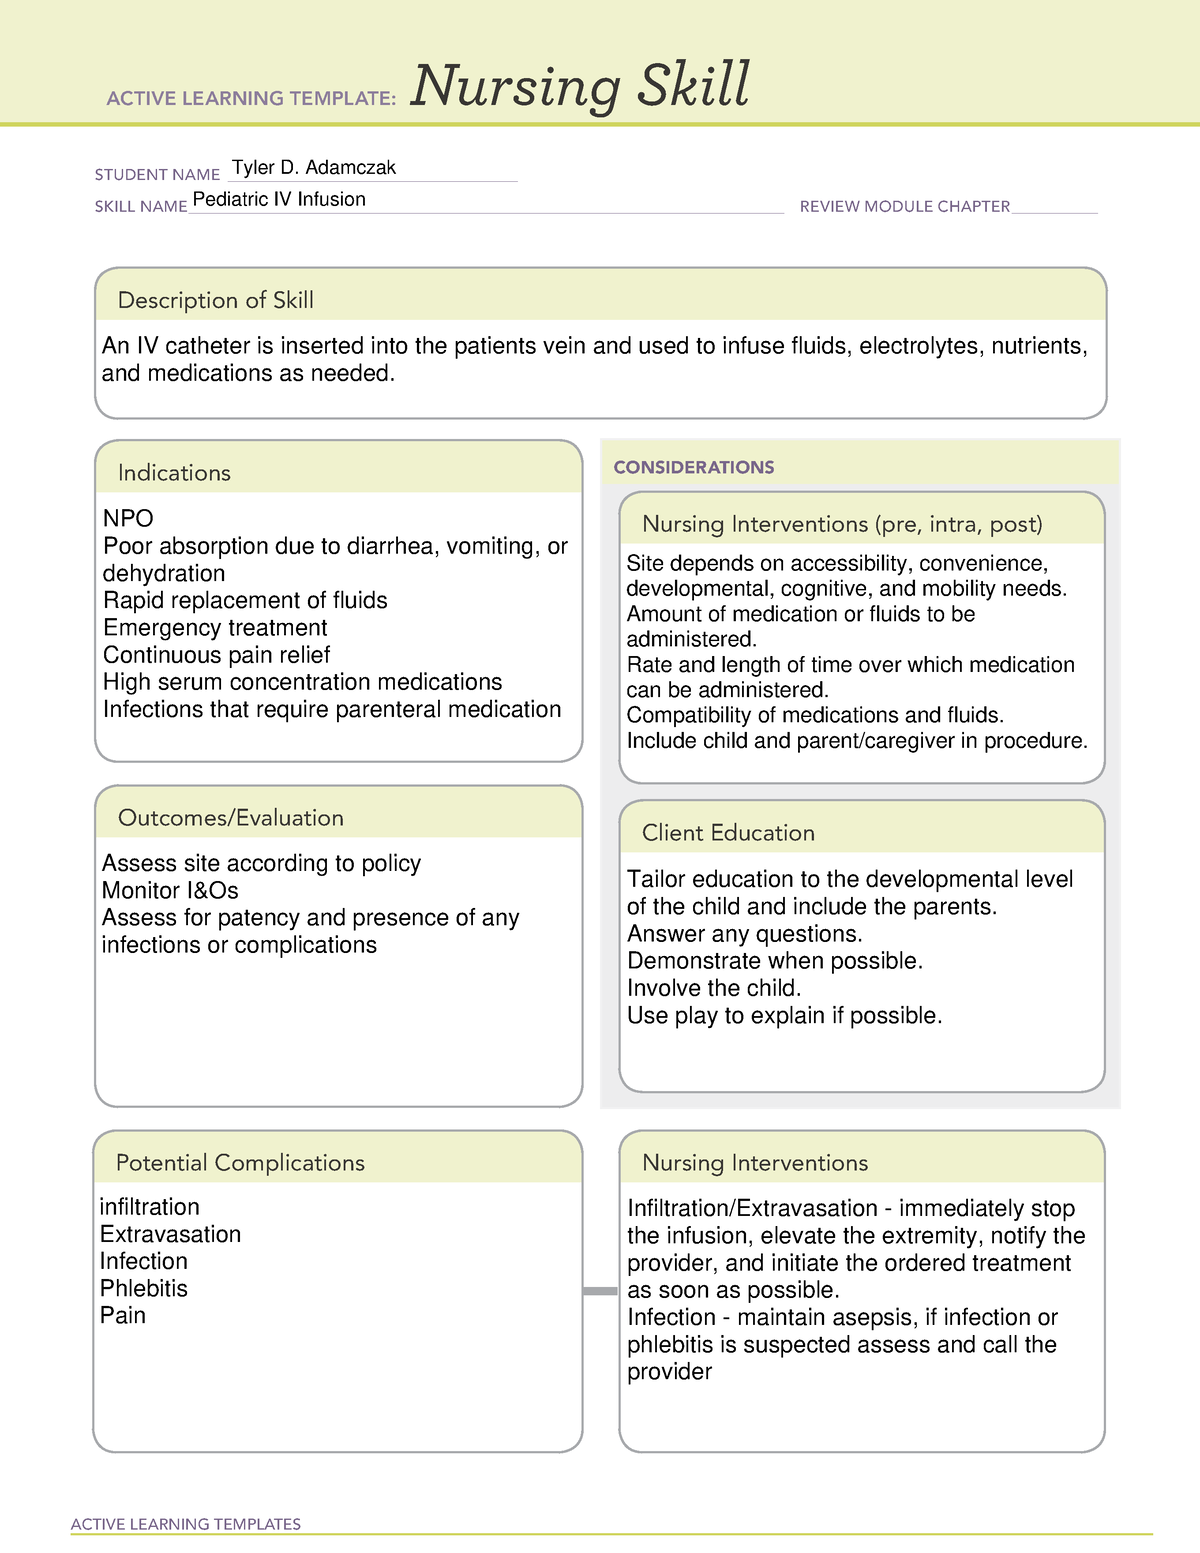 Pediatric IV Infusion Nursing Skill Template - ACTIVE LEARNING ...